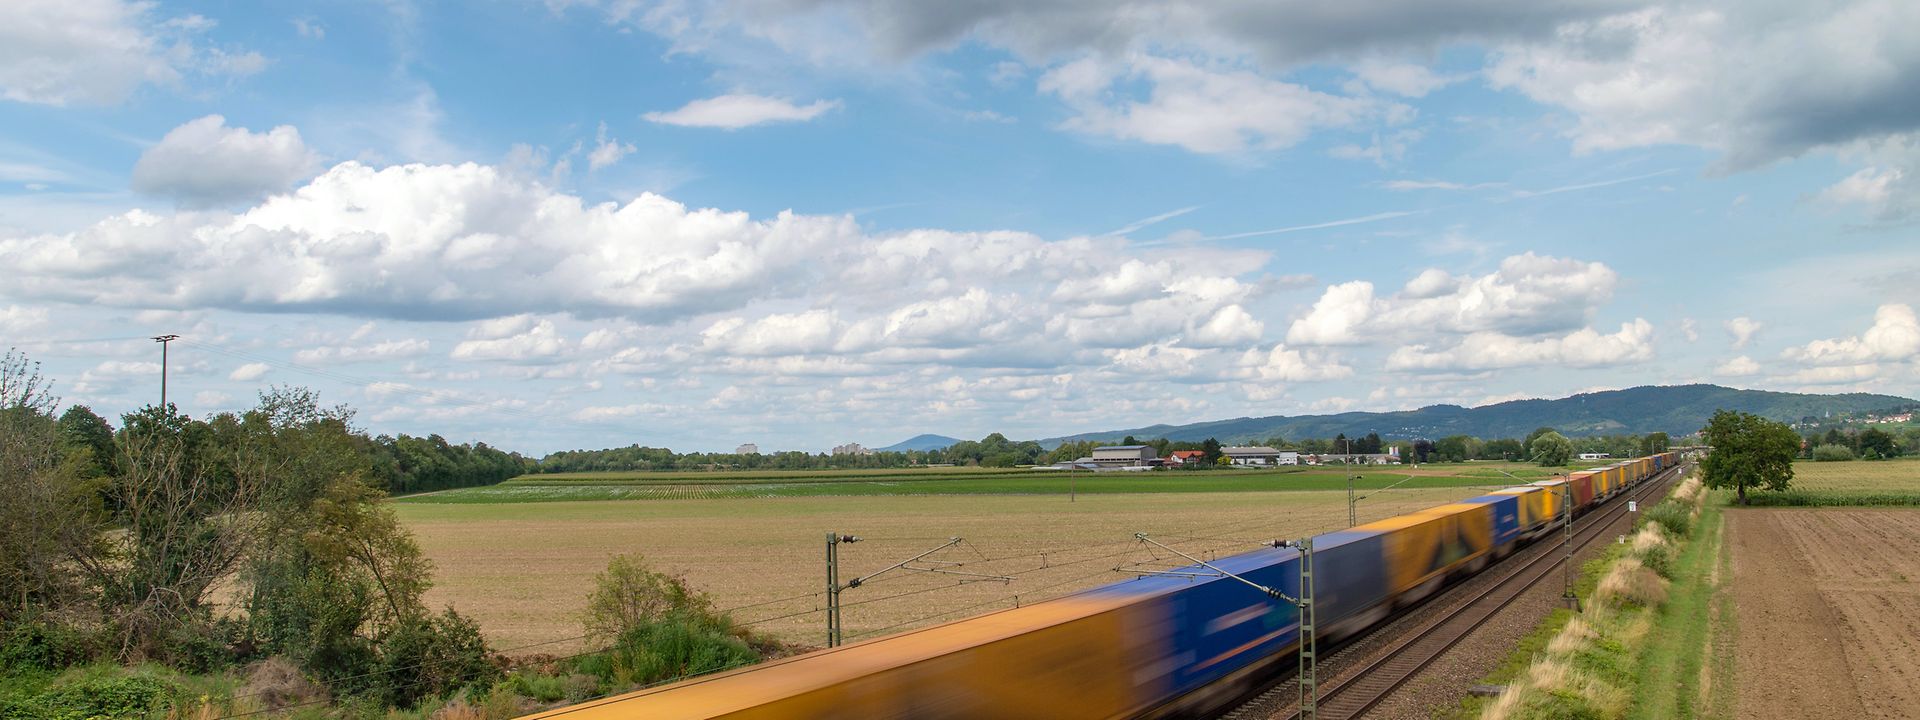 Train with swap bodies speeds through the countryside